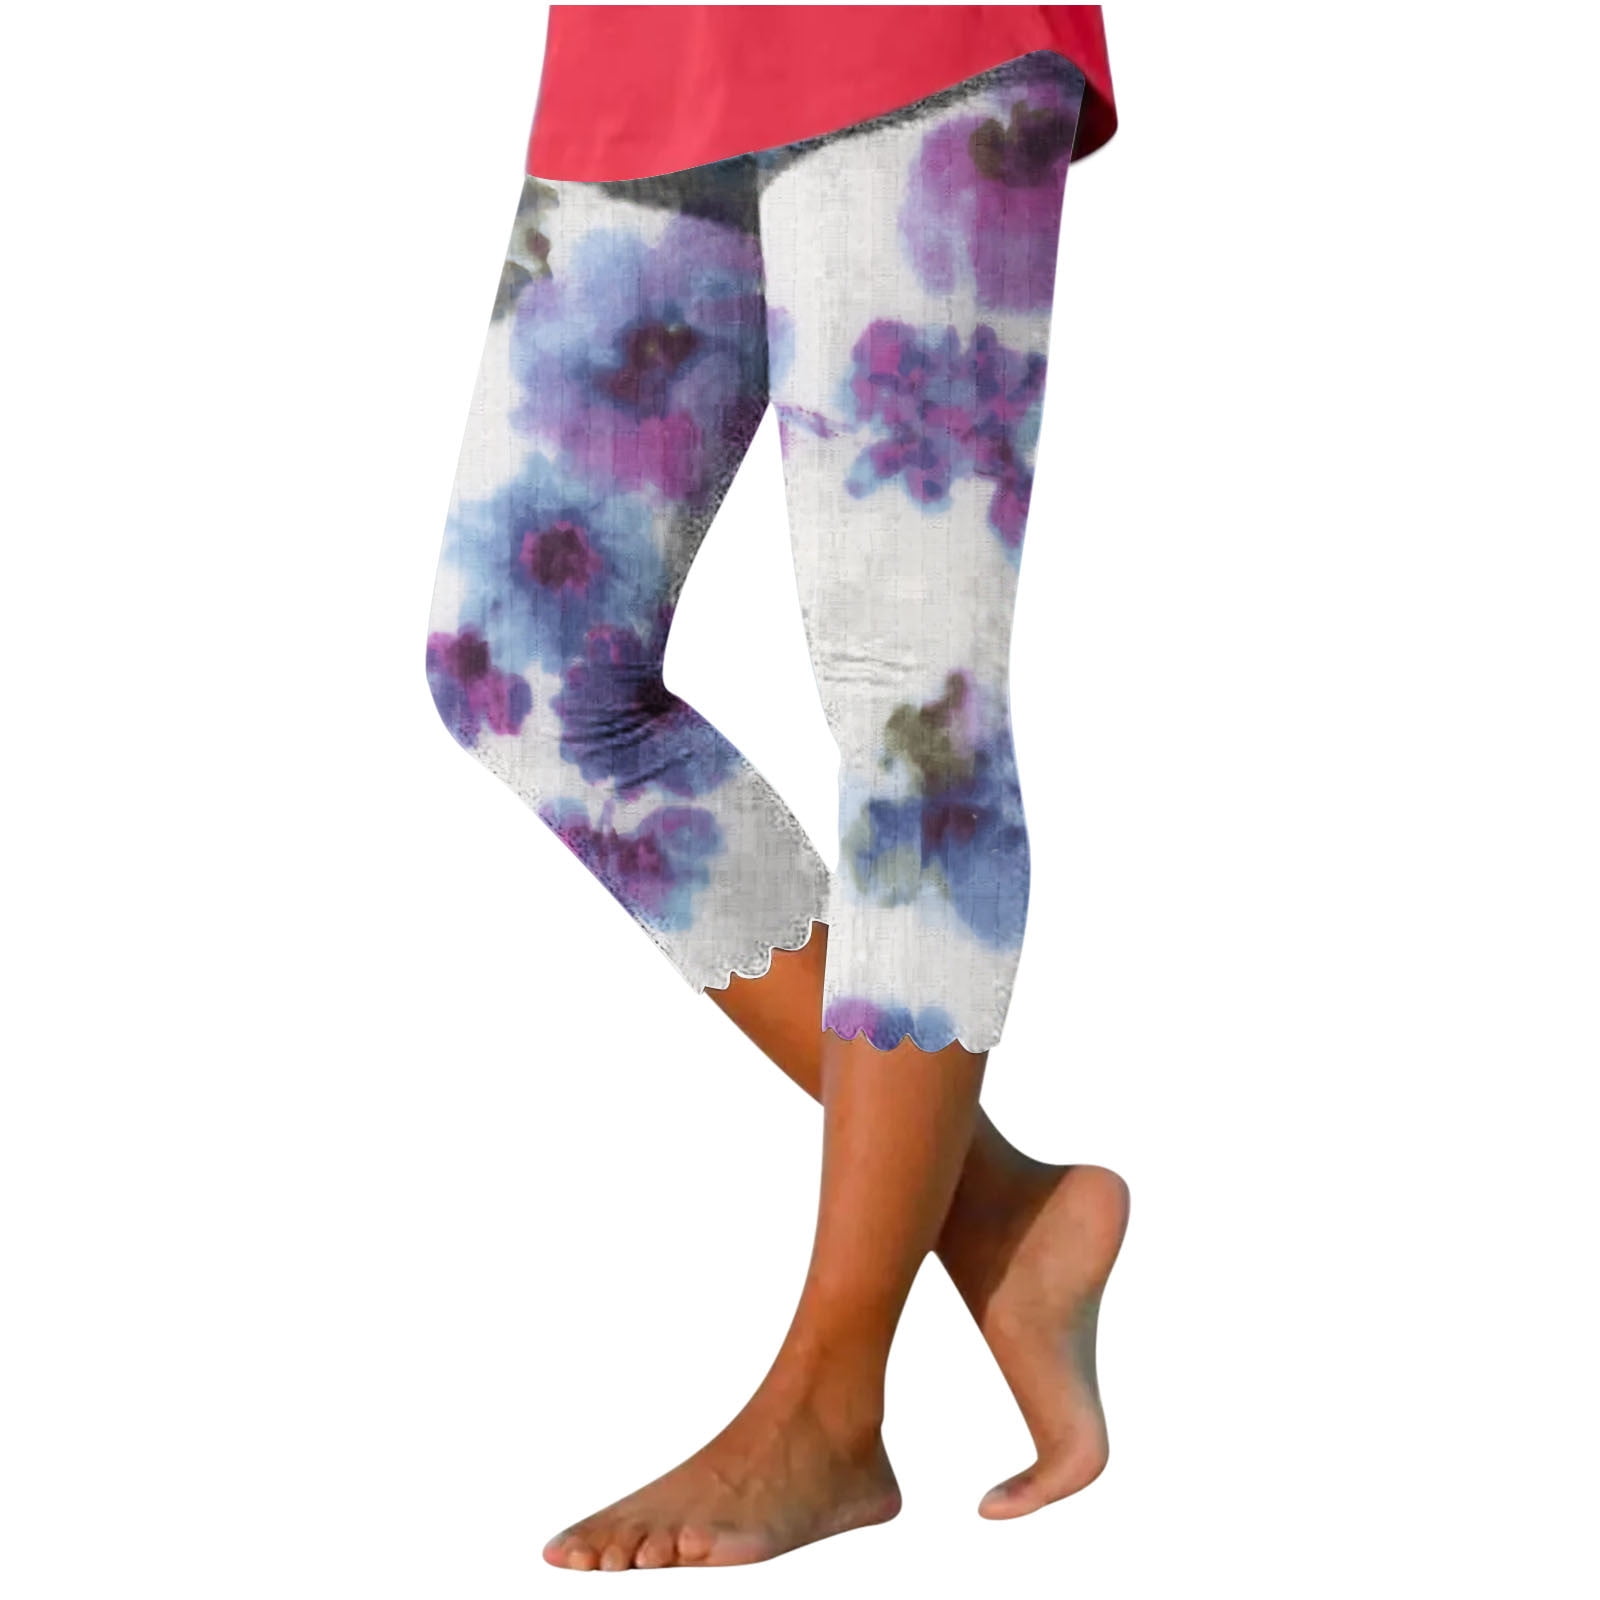 Women's Capri Pants in Trendy Denim & Embroidered Styles  Outfits with  leggings, Tie dye tunic top, How to wear leggings